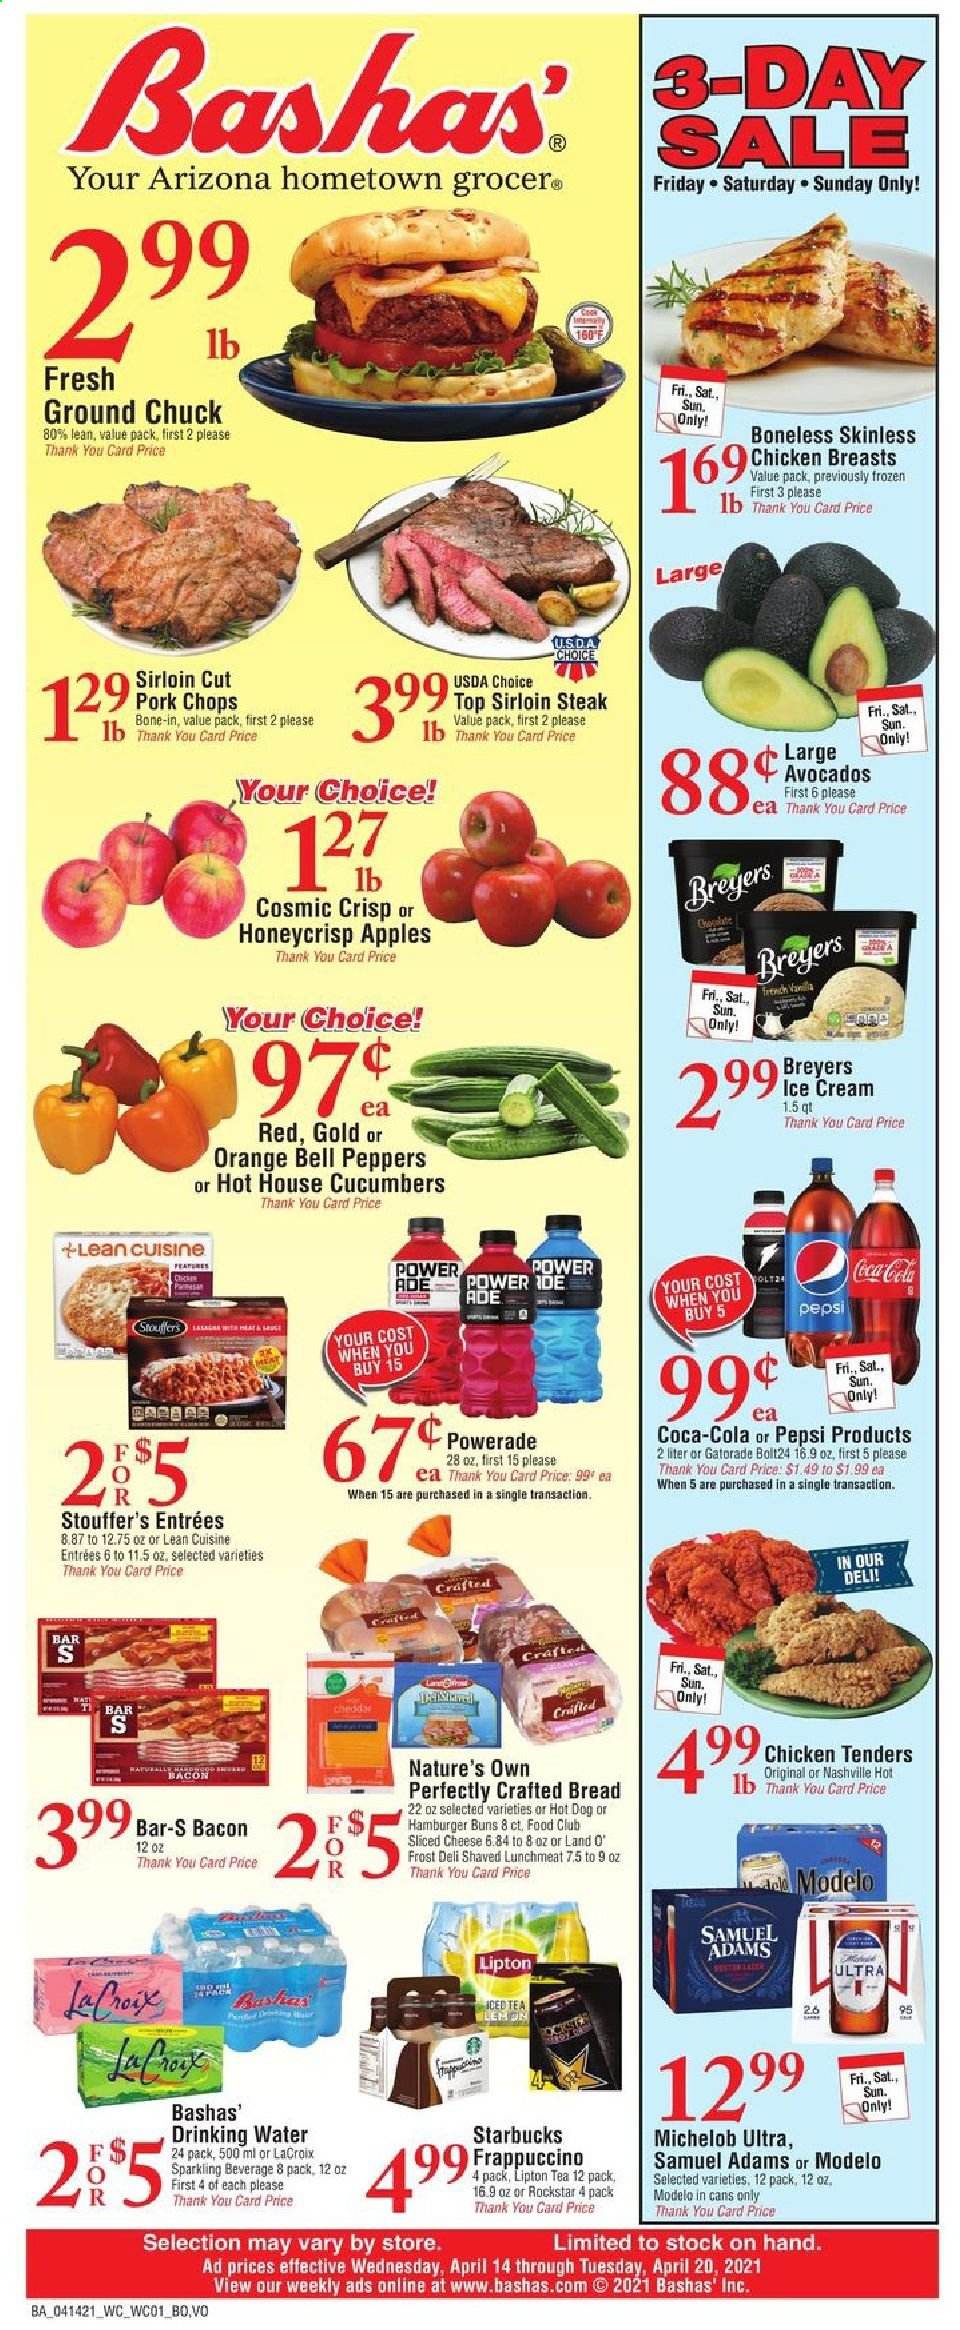 thumbnail - Bashas' Flyer - 04/14/2021 - 04/20/2021 - Sales products - bread, buns, burger buns, bell peppers, cucumber, apples, avocado, oranges, hot dog, Lean Cuisine, bacon, lunch meat, sliced cheese, cheddar, cheese, ice cream, Stouffer's, Coca-Cola, Powerade, Pepsi, Lipton, AriZona, Rockstar, Gatorade, Starbucks, frappuccino, beer, Michelob, Modelo, chicken breasts, chicken tenders, beef sirloin, ground chuck, steak, sirloin steak, pork chops, pork meat, Nature's Own, peppers. Page 1.